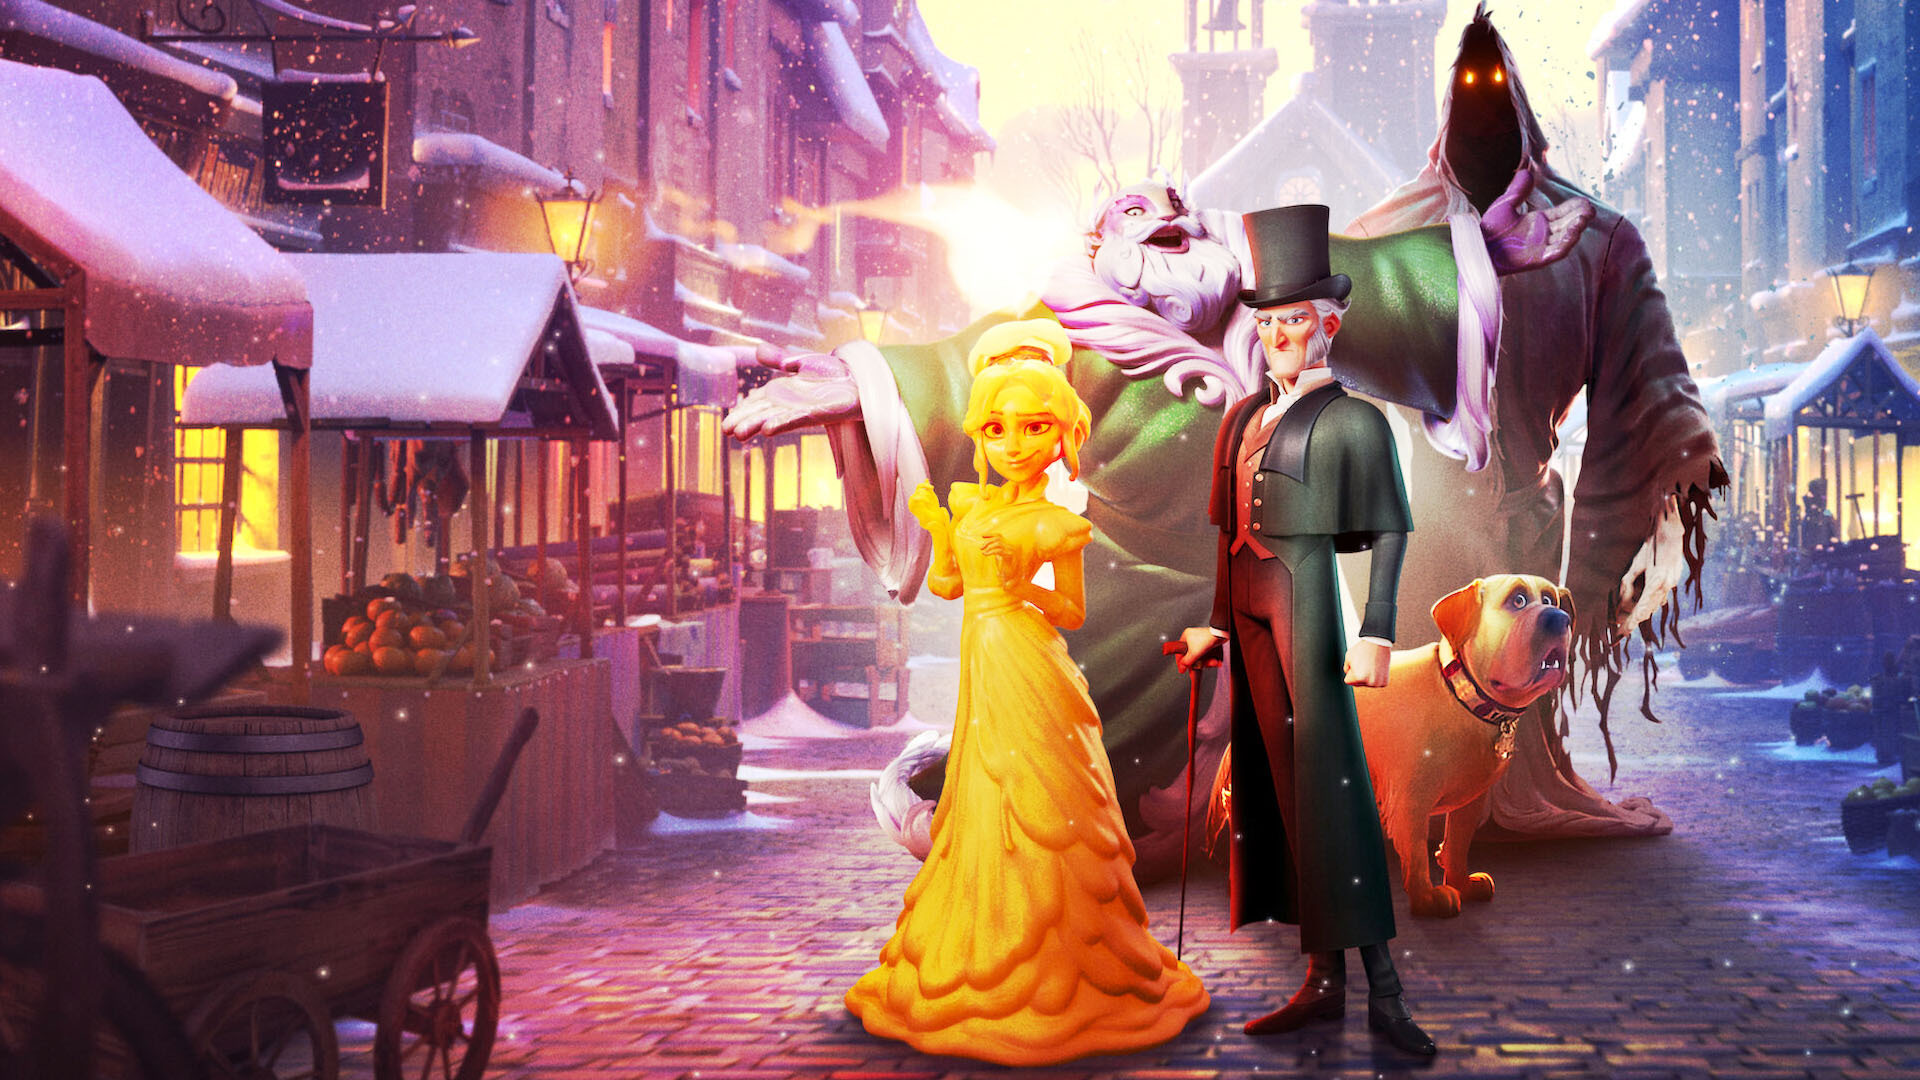 Scrooge A Christmas Carol Netflix Release Date, Cast, and More